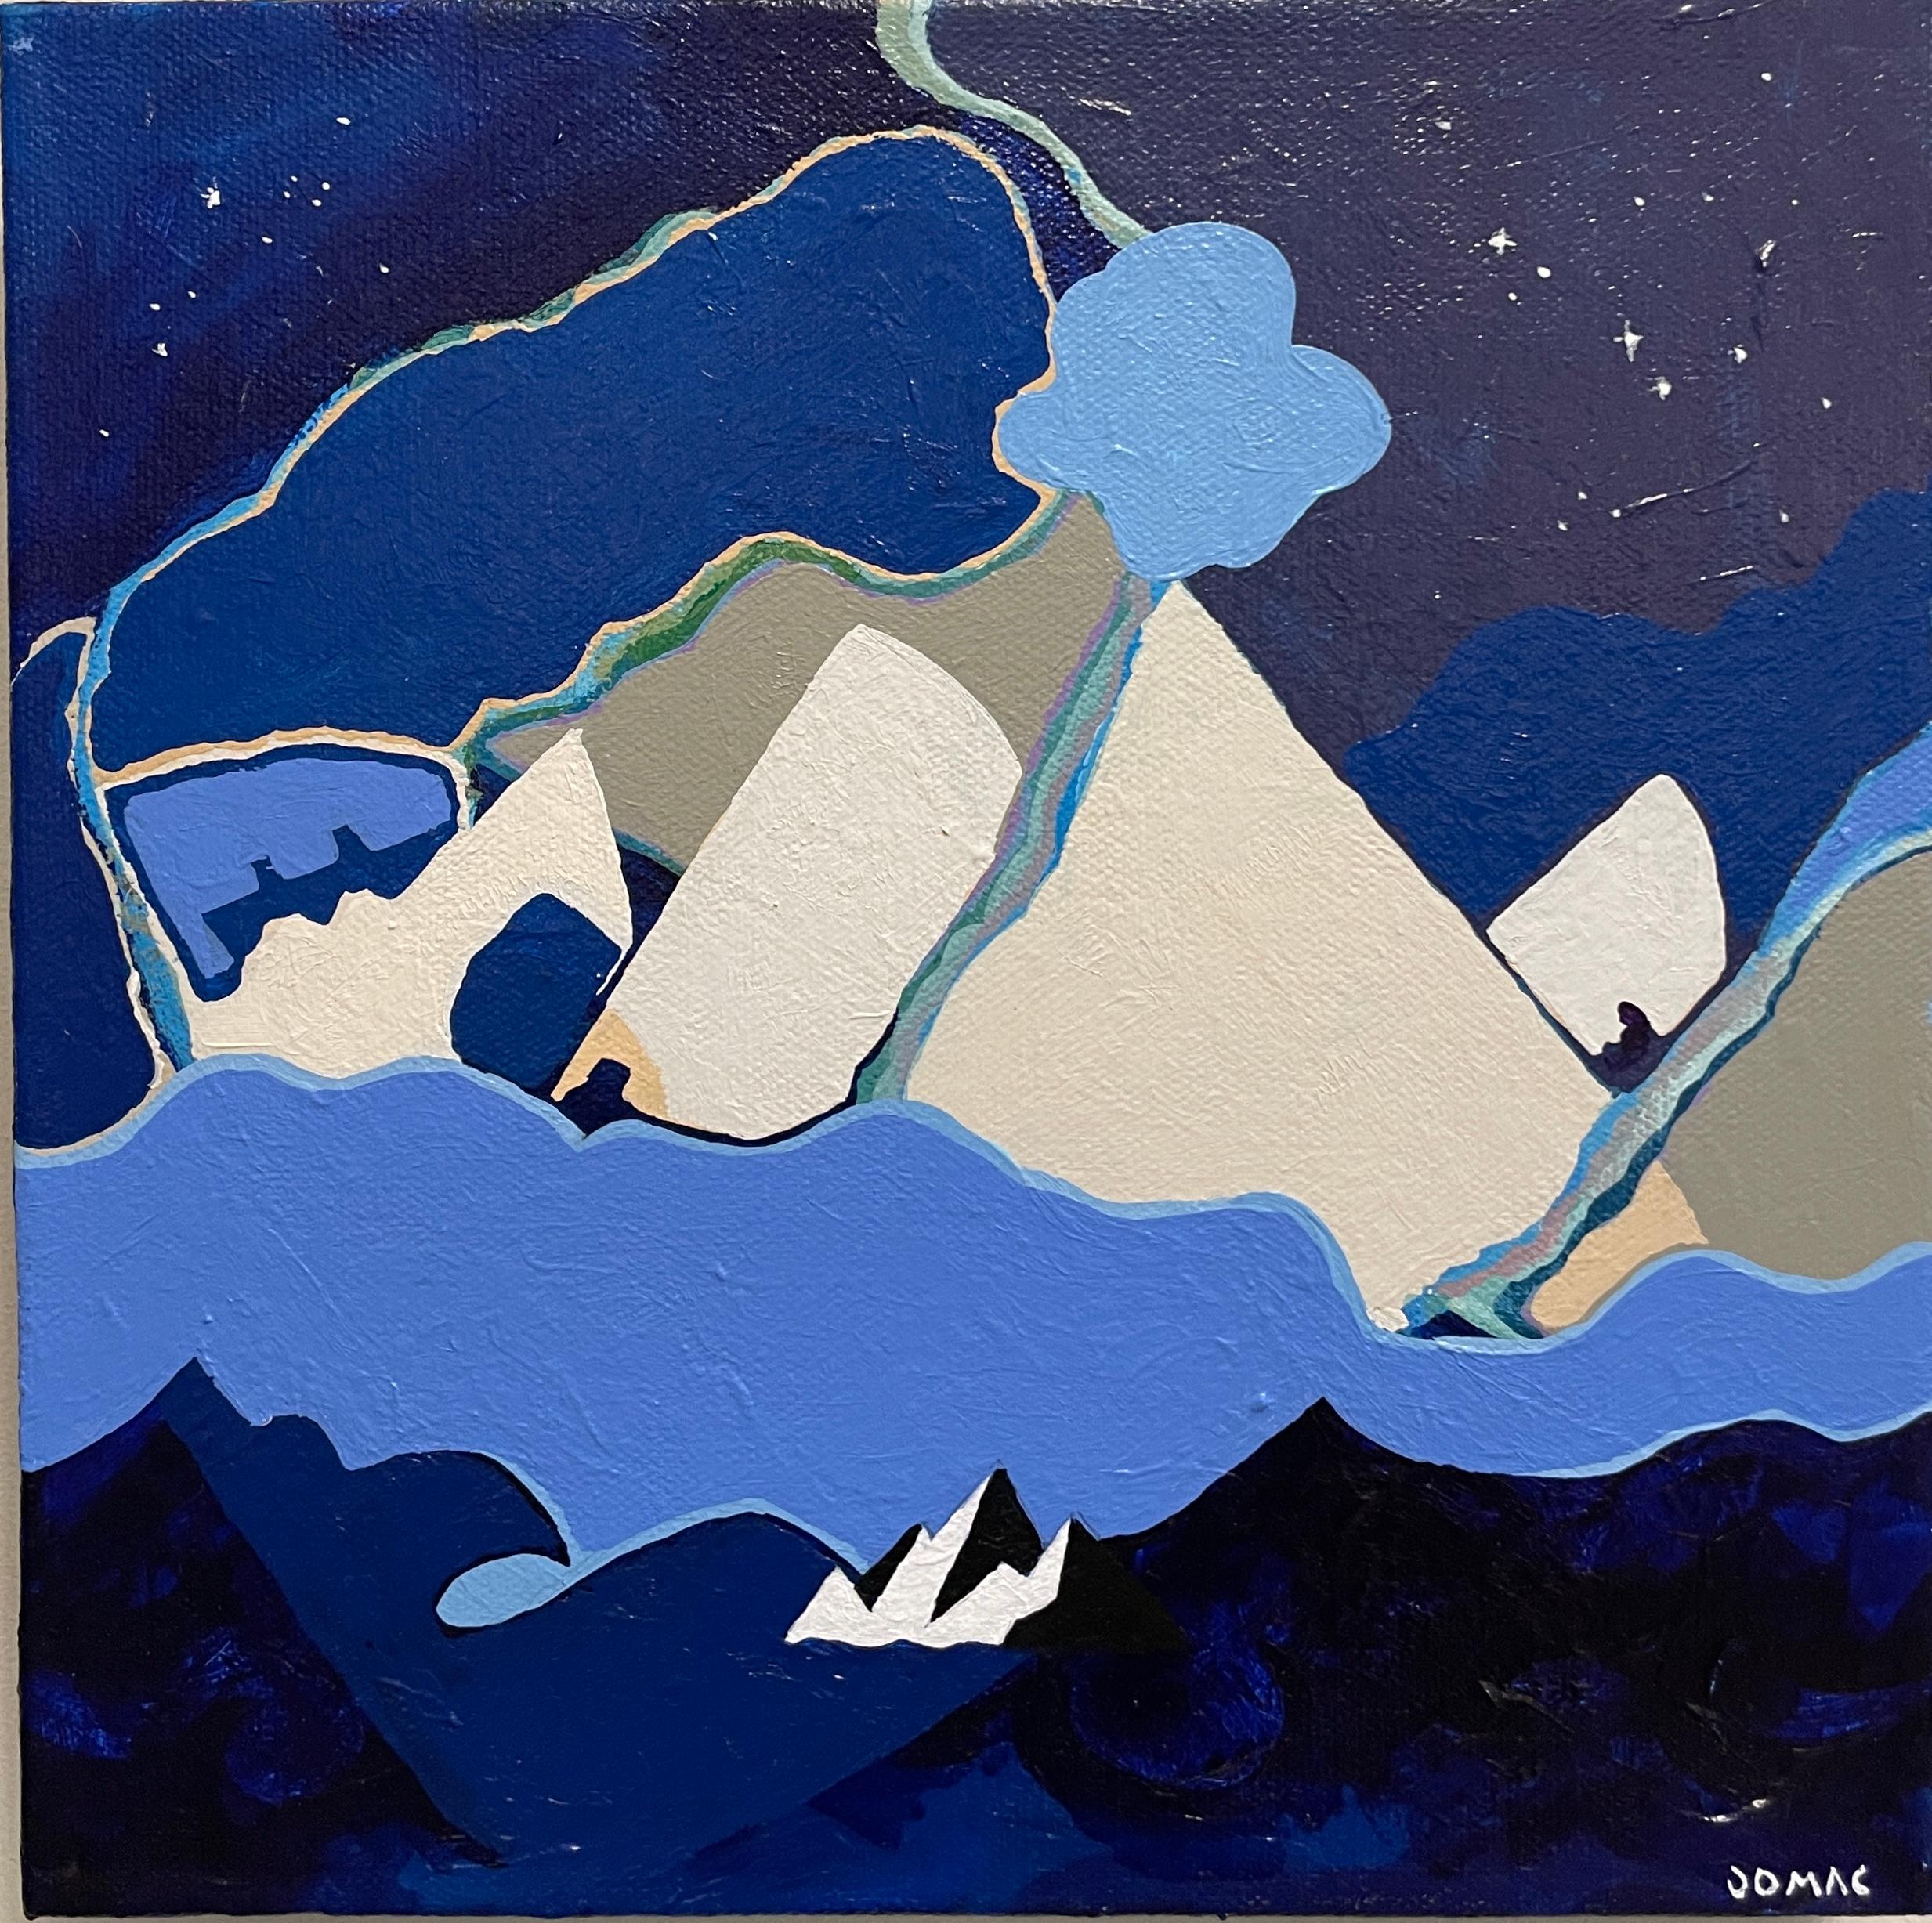 Joseph McAleer Abstract Painting - A Night to Remember: abstract landscape w/ sea/ocean & stars at night w/ blues